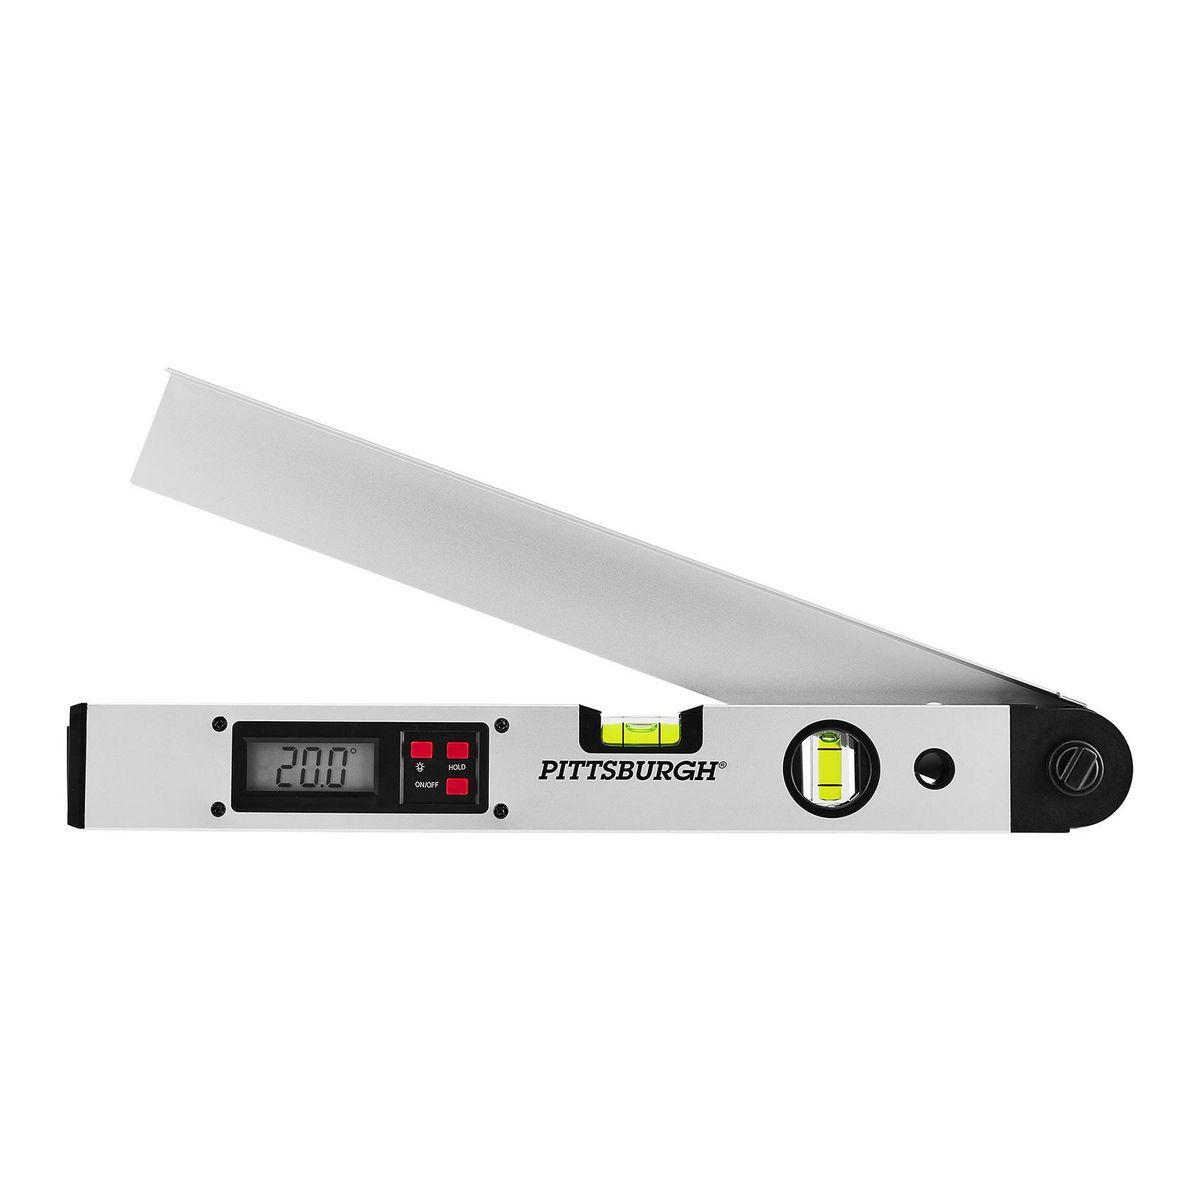 PITTSBURGH 16 in. Digital Angle Level